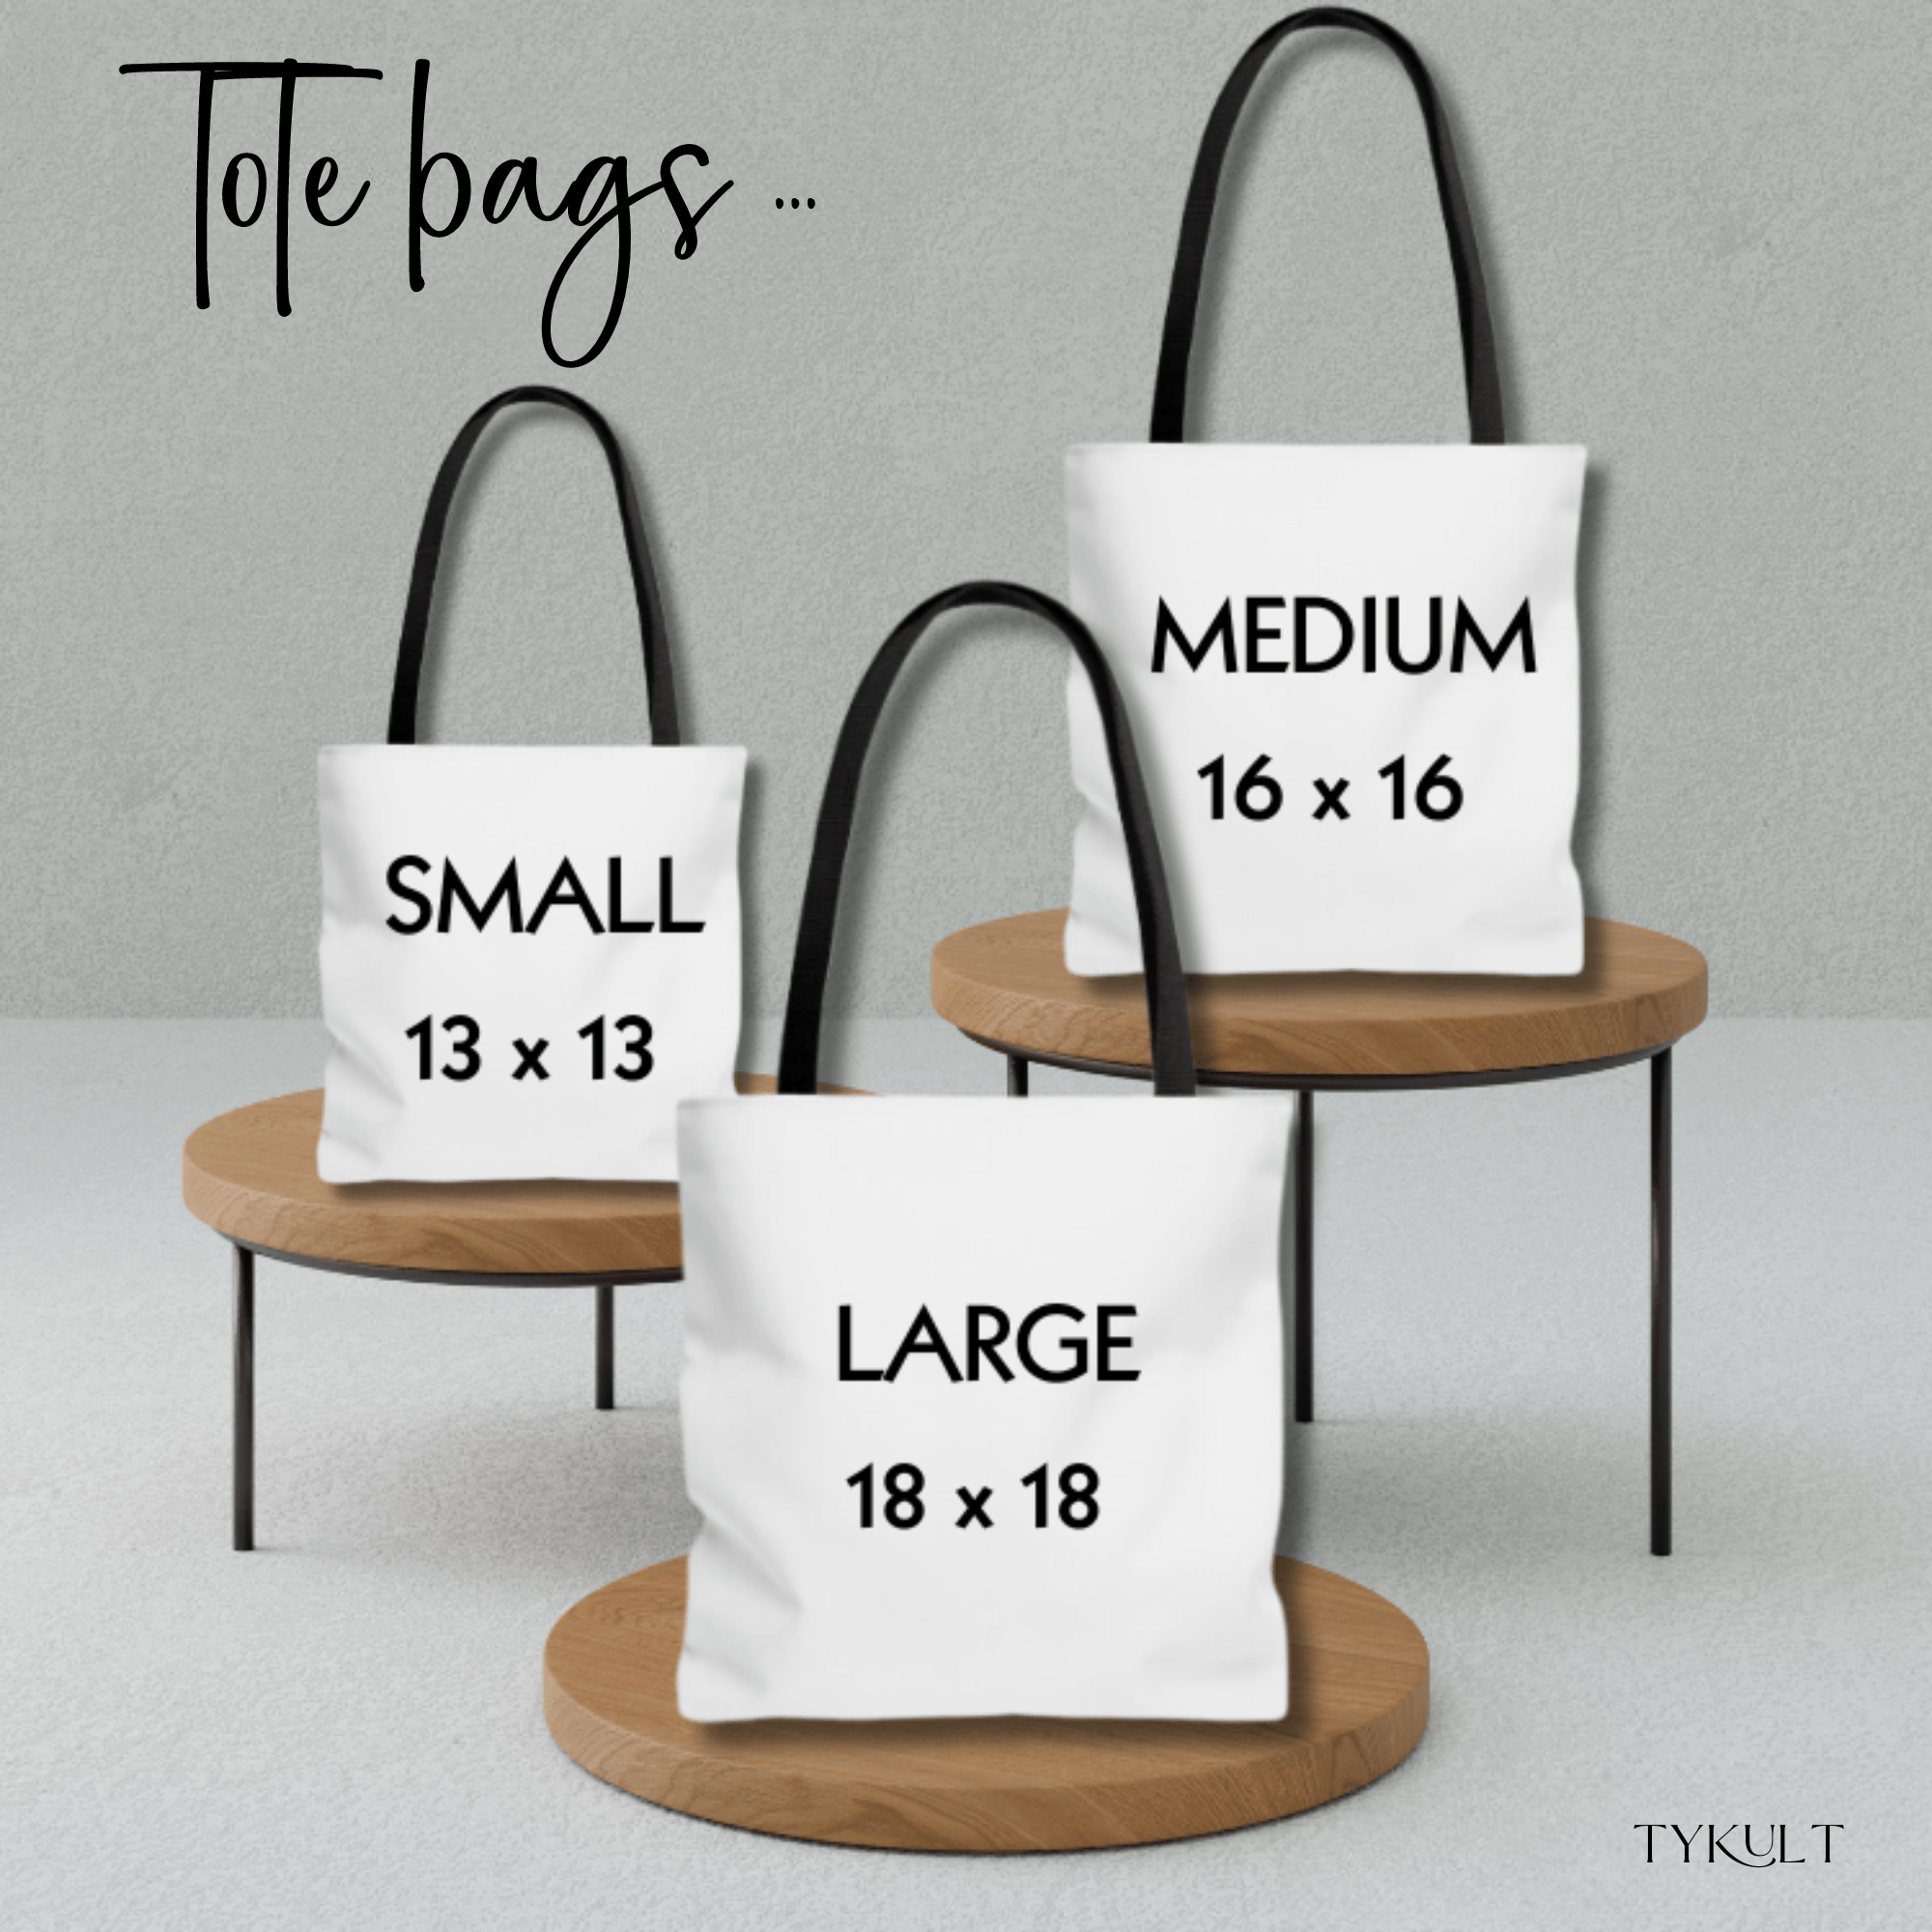 PERSONALIZABLE TOTE BAG | MONOGRAM - V | PERFECT GIFT for FIANCEE, WIFE, DAUGHTER